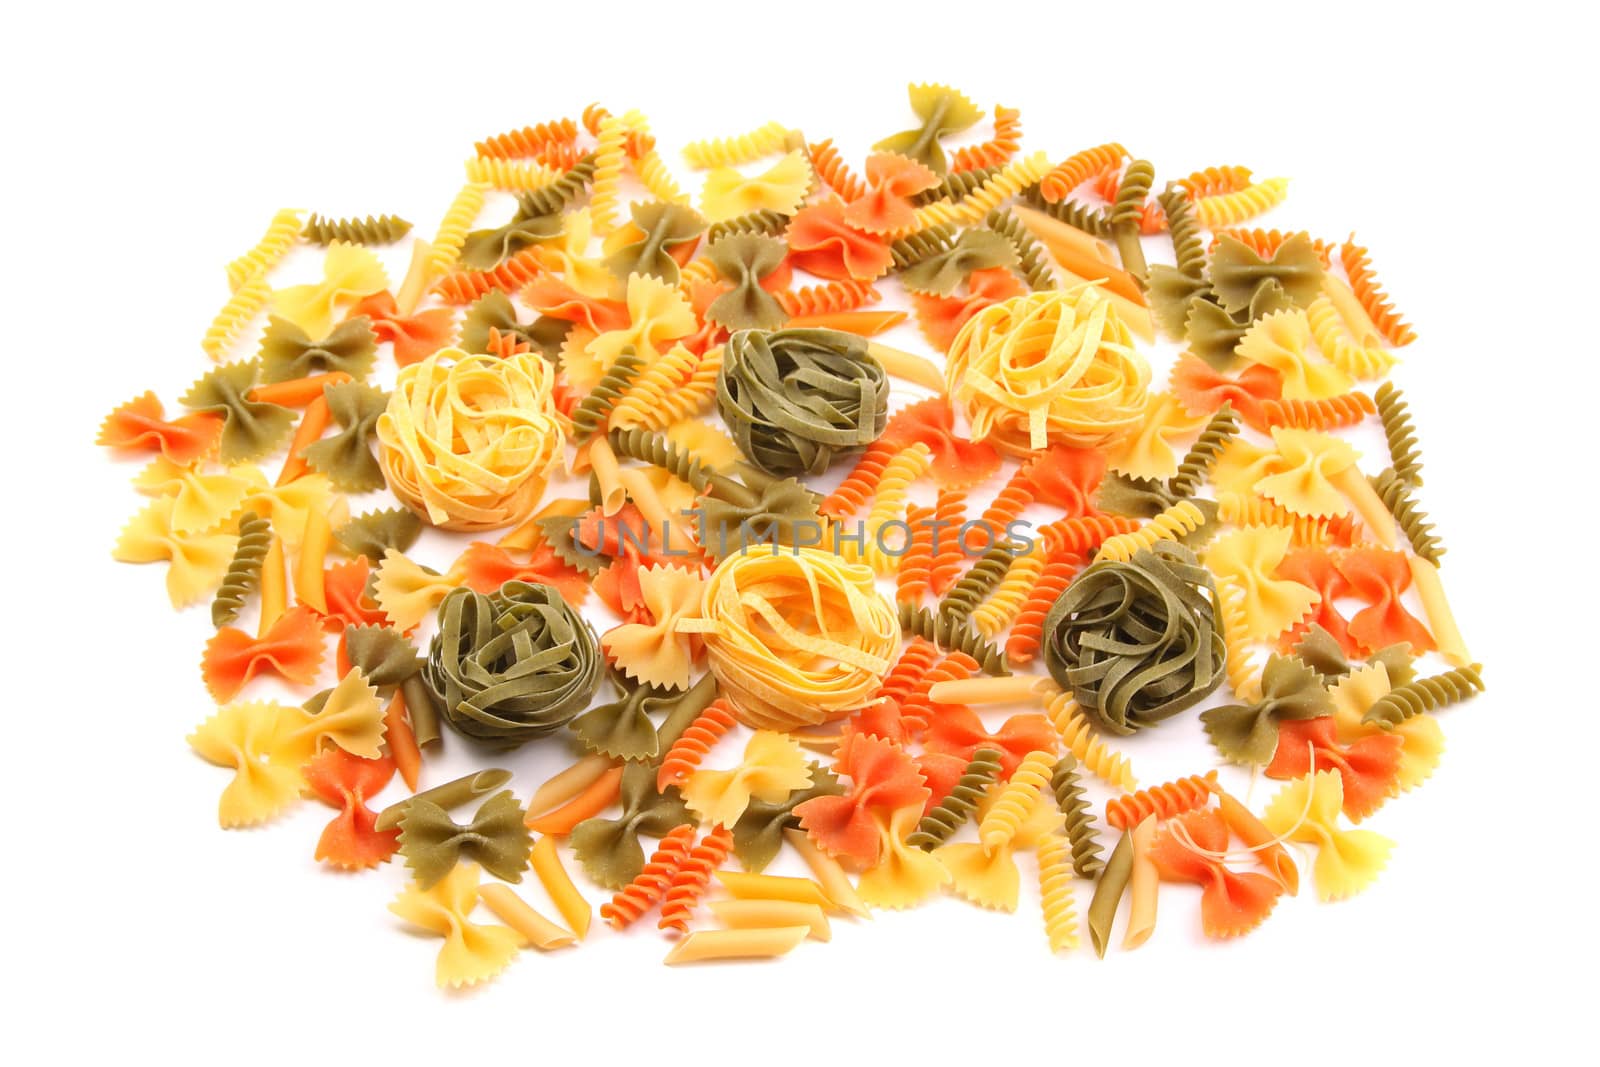 A different pasta in three colors on the white background.